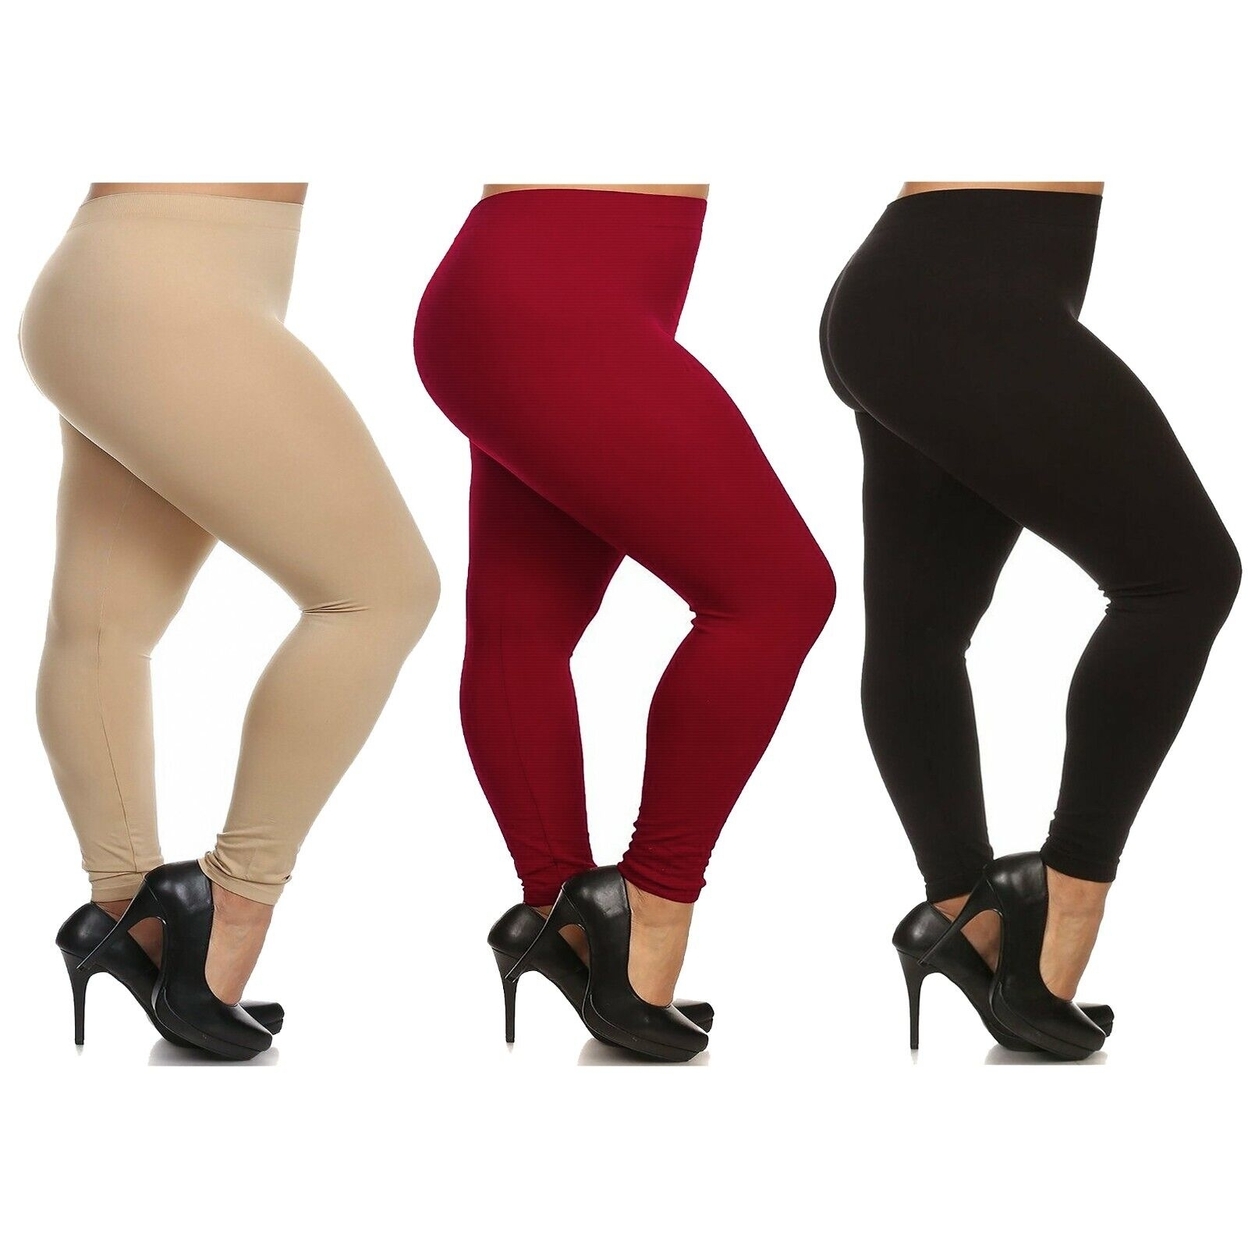 Women's Casual Ultra Soft Smooth High Waisted Athletic Active Yoga Leggings Plus Size Available - Black, 3x